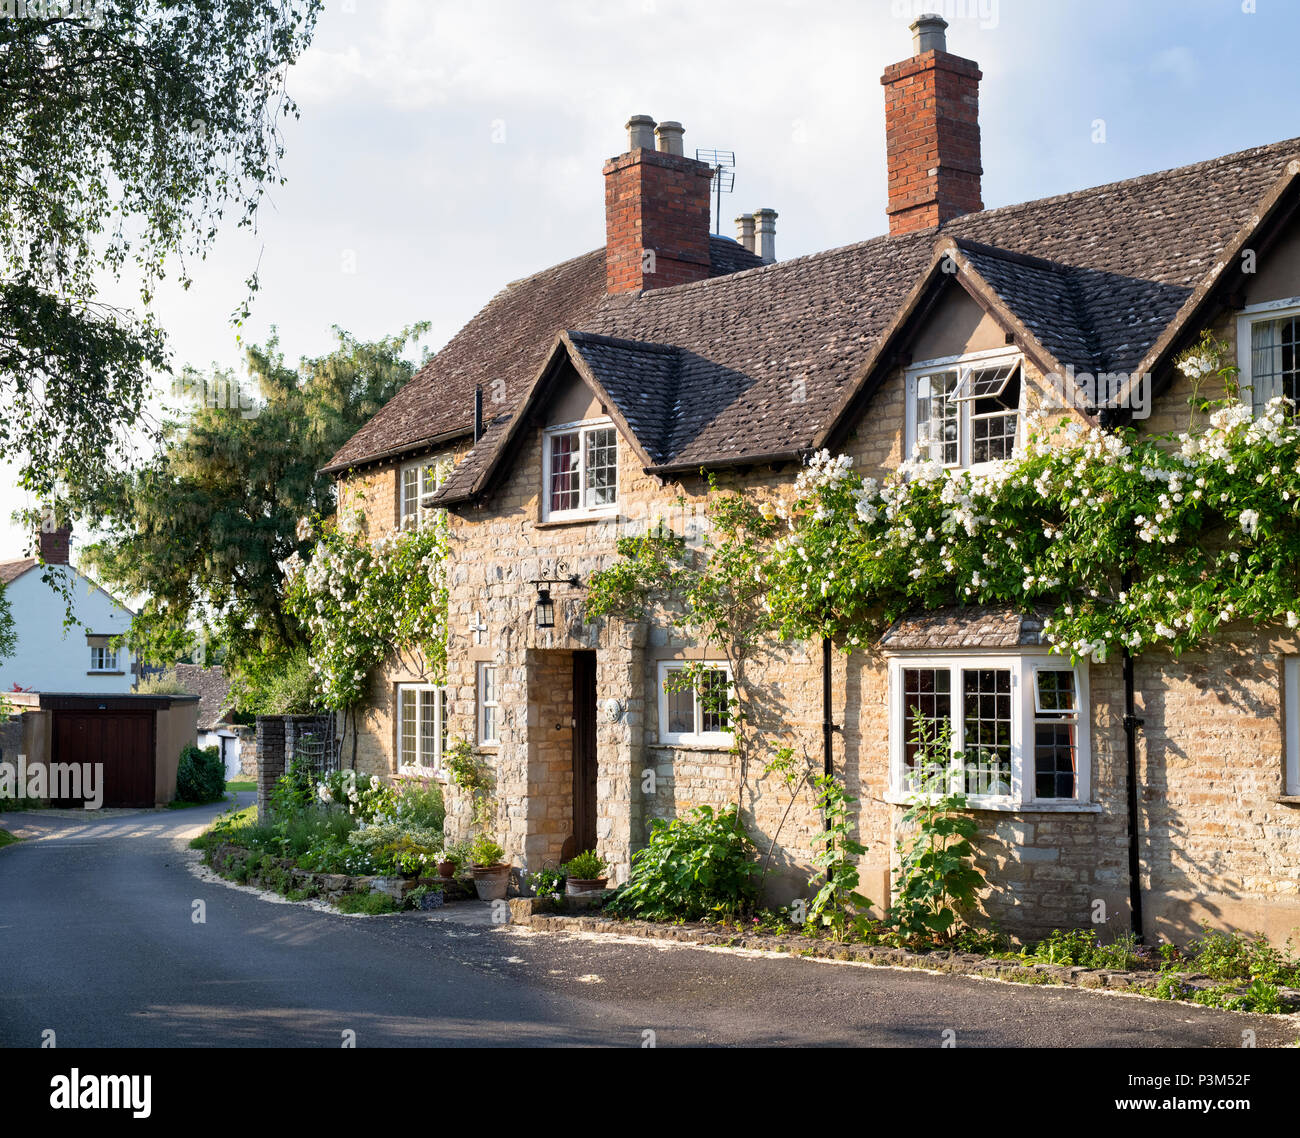 Cottage and climbing roses in the village of Tredington, Warwickshire, England Stock Photo